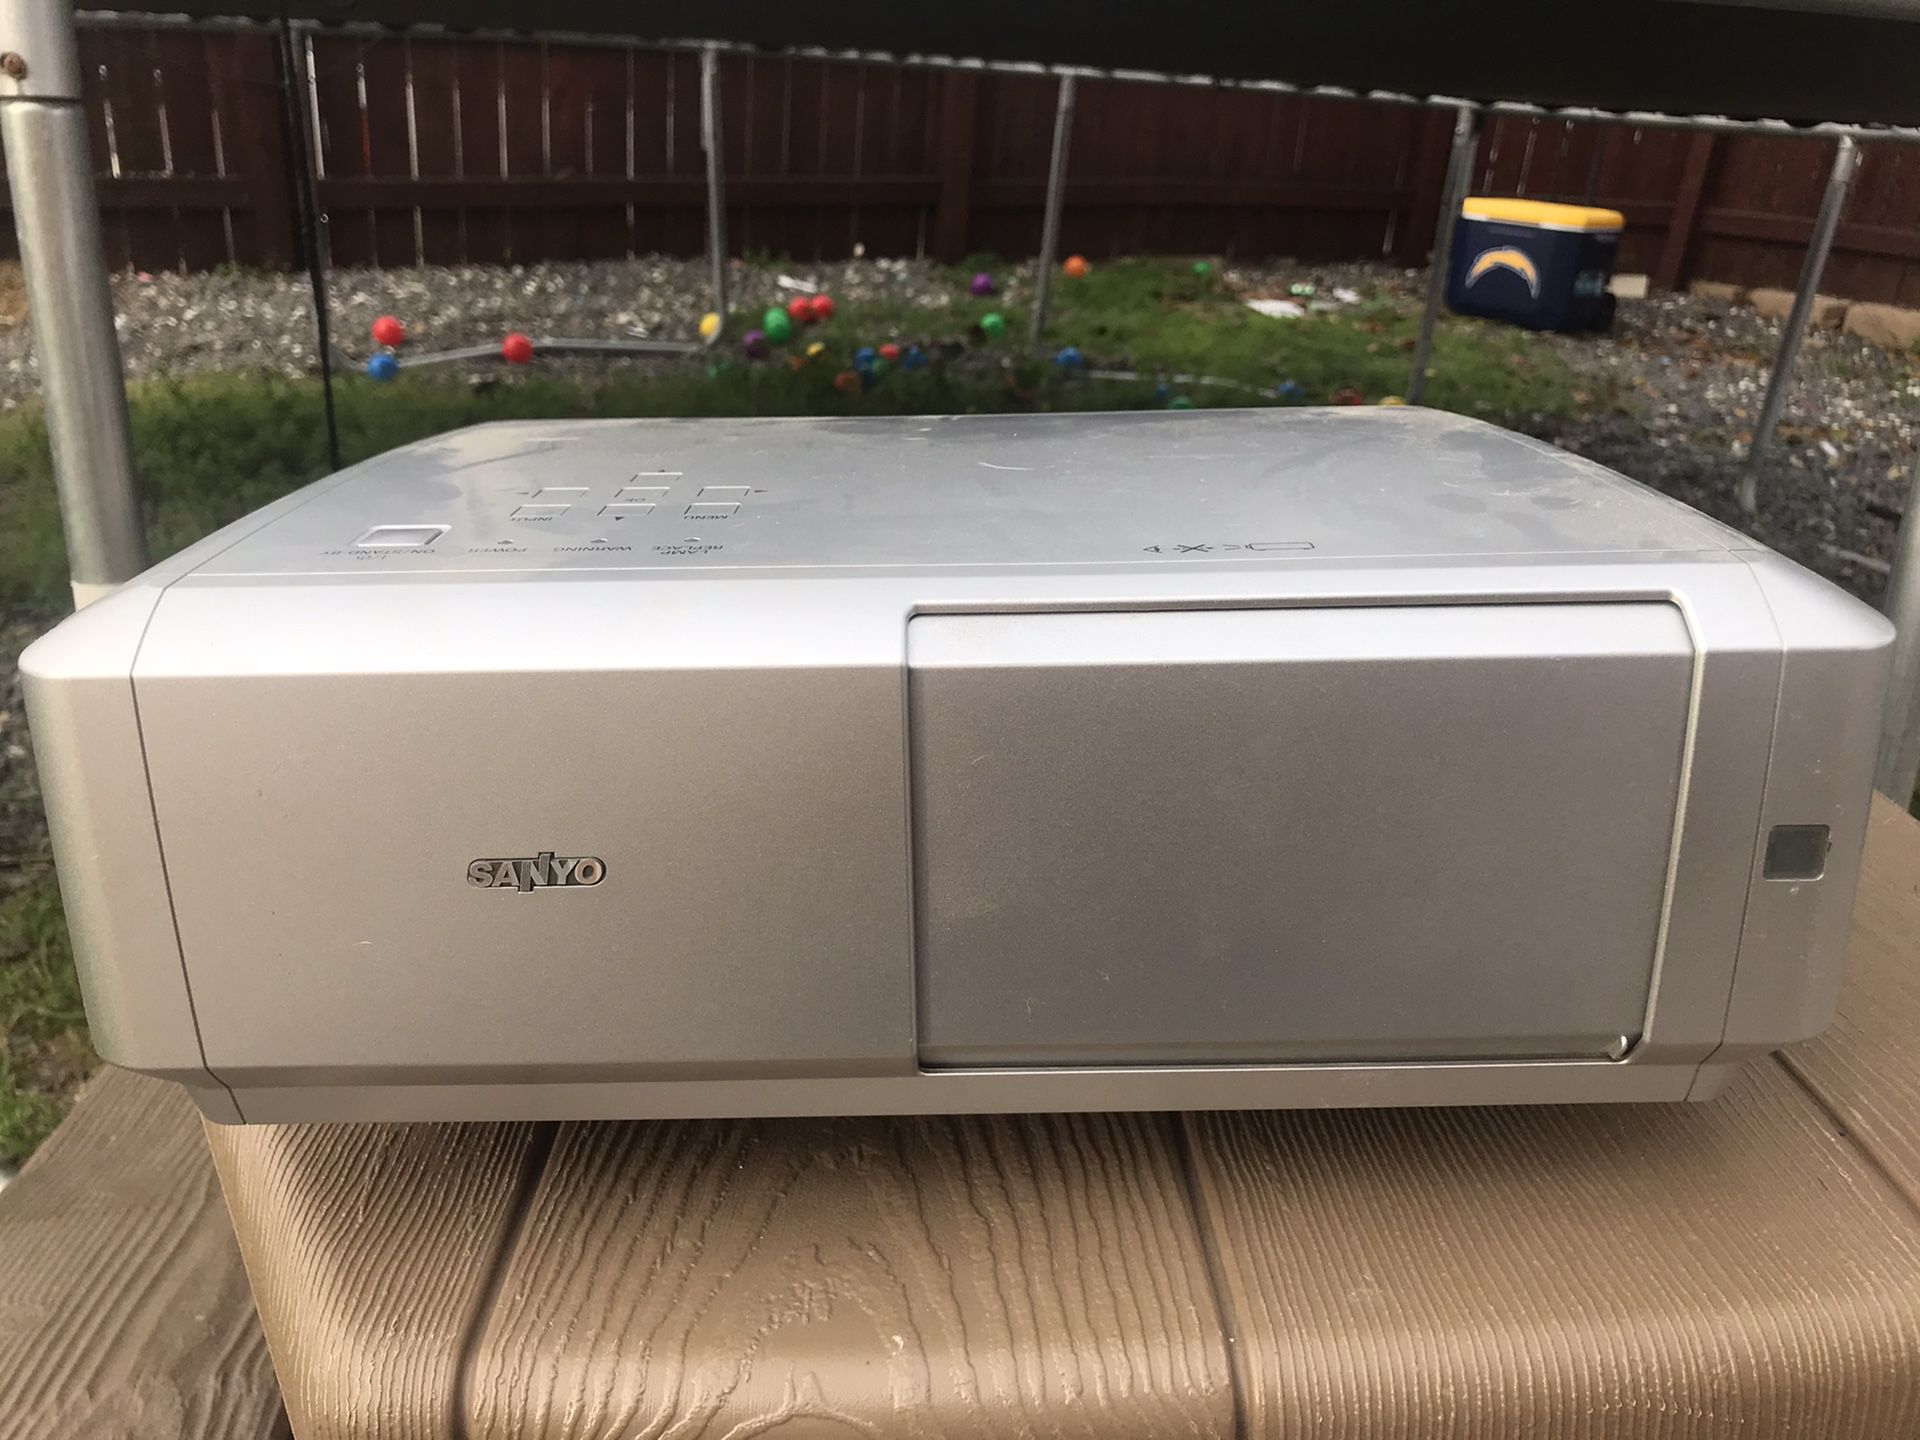 Projector, DVD players, small tv and more. Take everything for $50